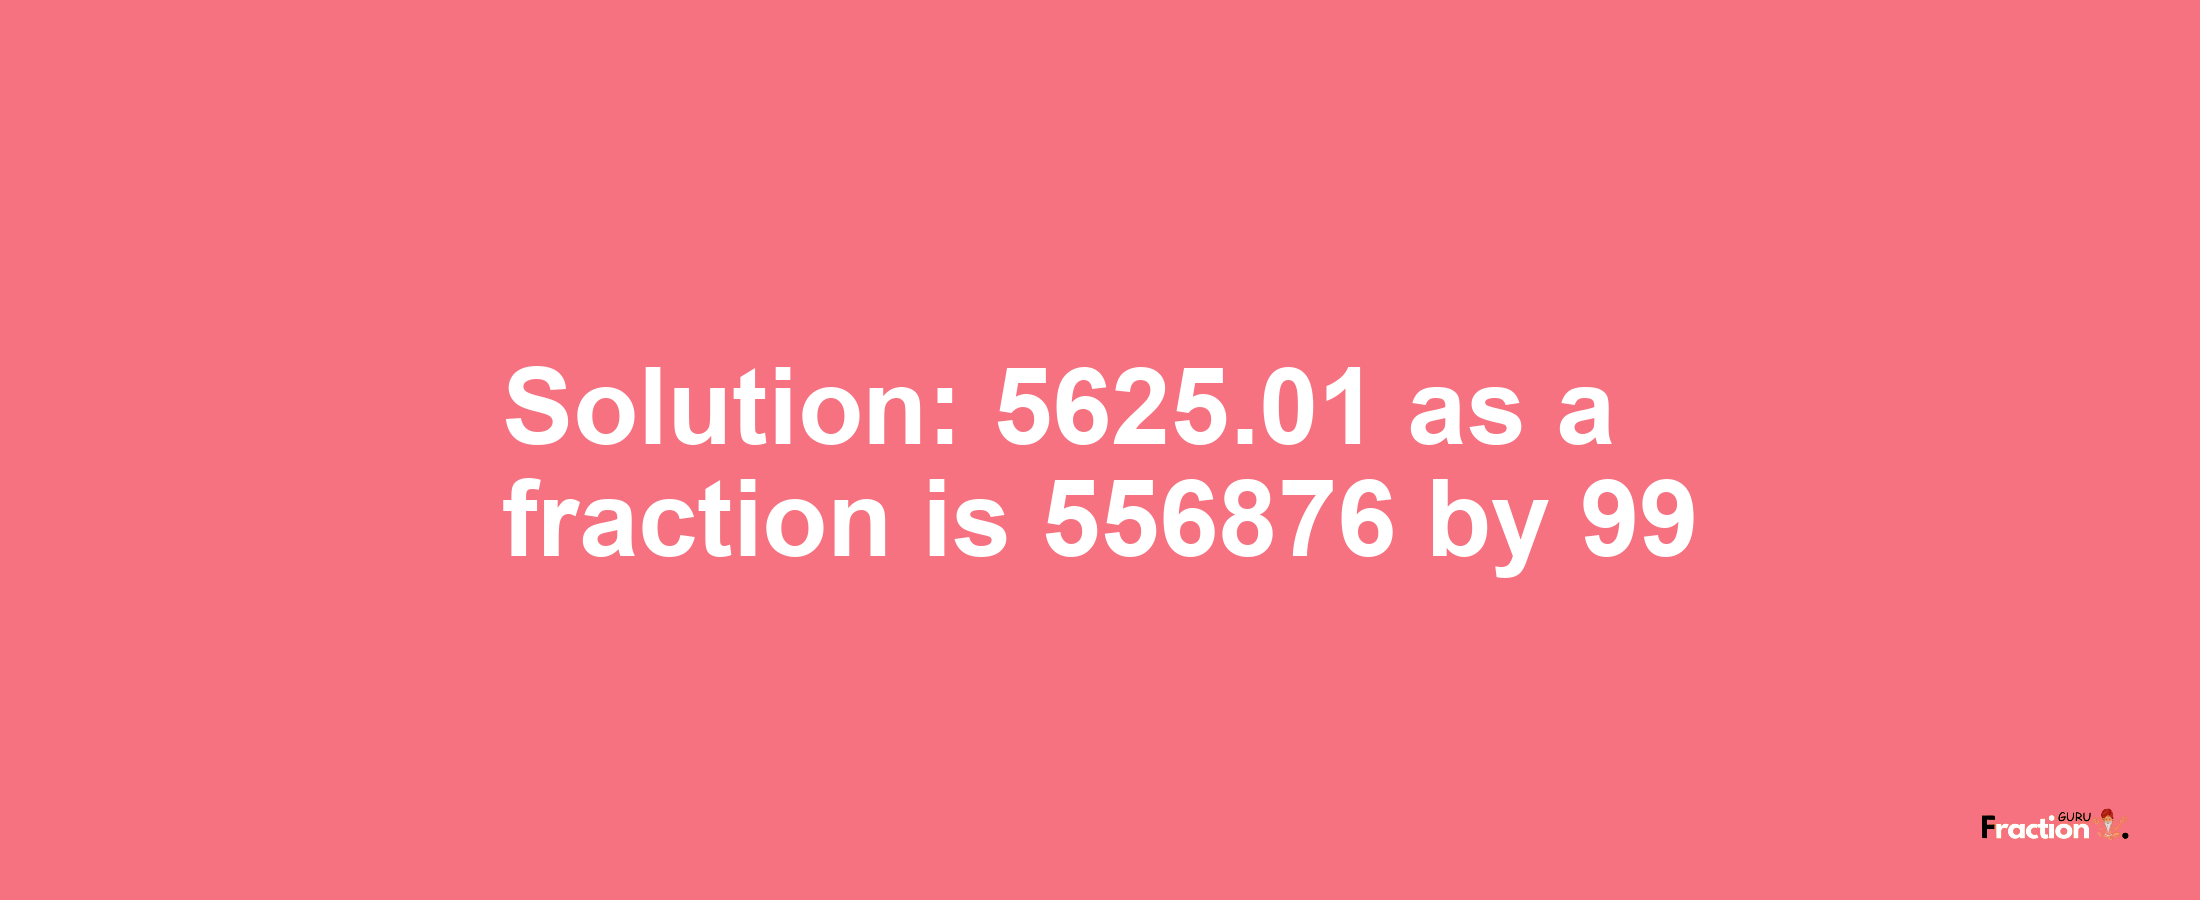 Solution:5625.01 as a fraction is 556876/99